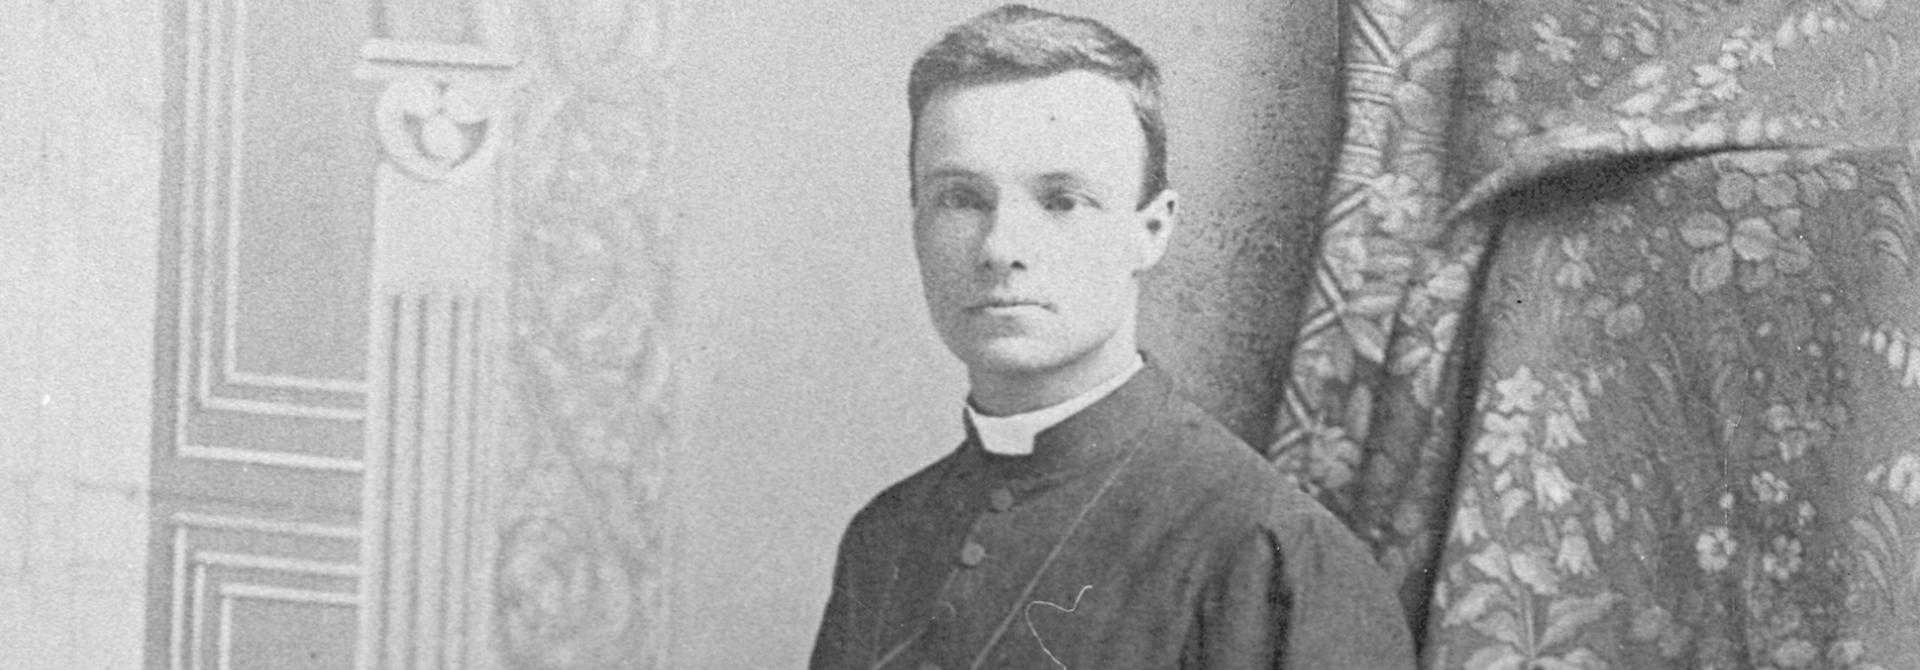 150th Anniversary of Brother André’s Profession, CSC.